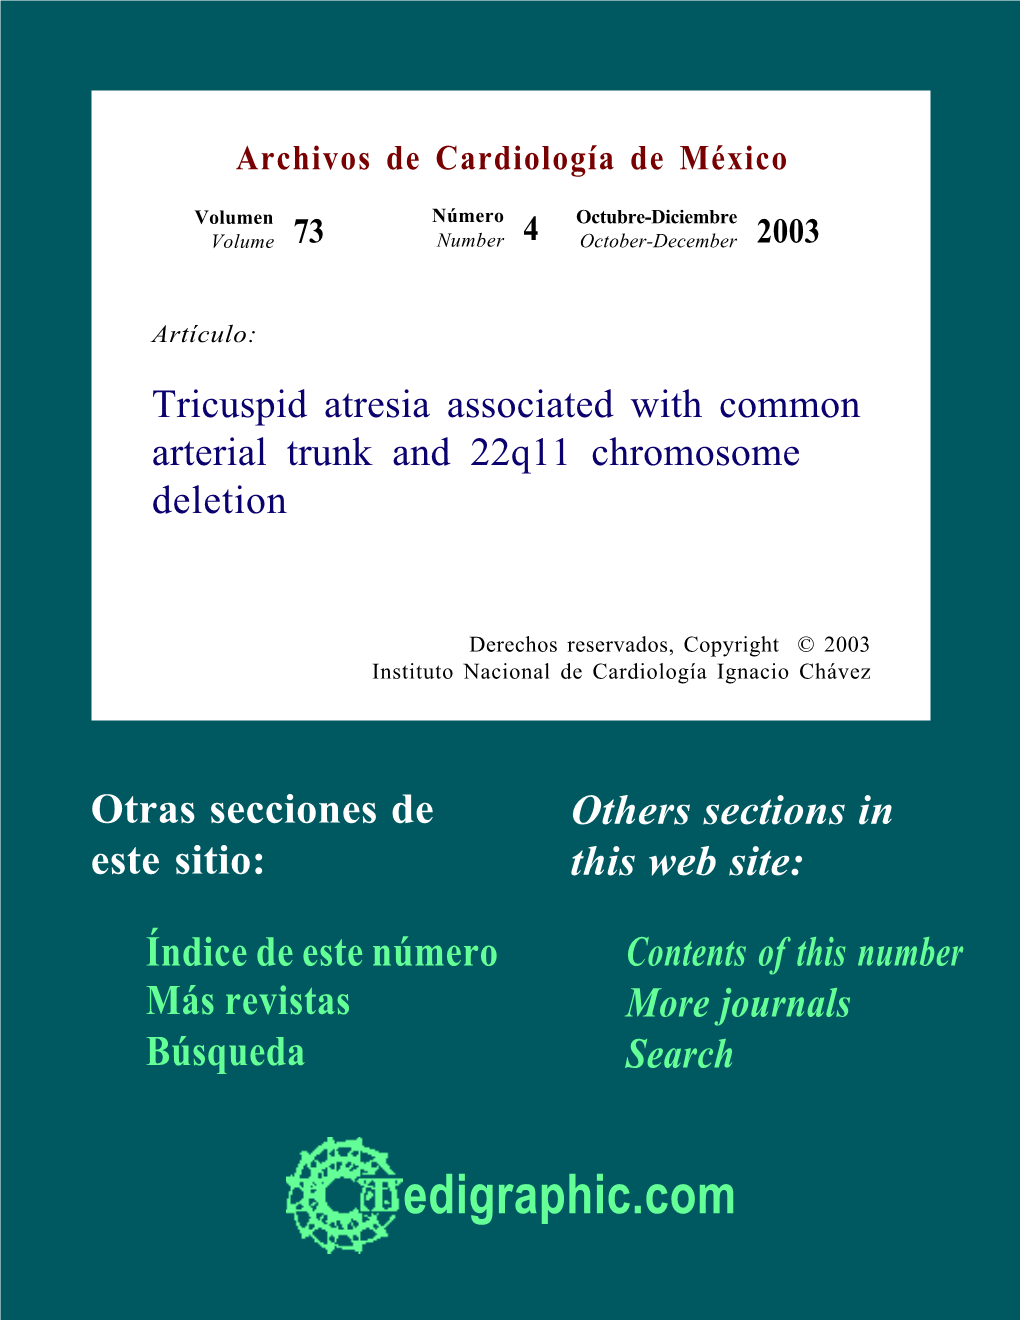 Tricuspid Atresia Associated with Common Arterial Trunk and 22Q11 Chromosome Deletion